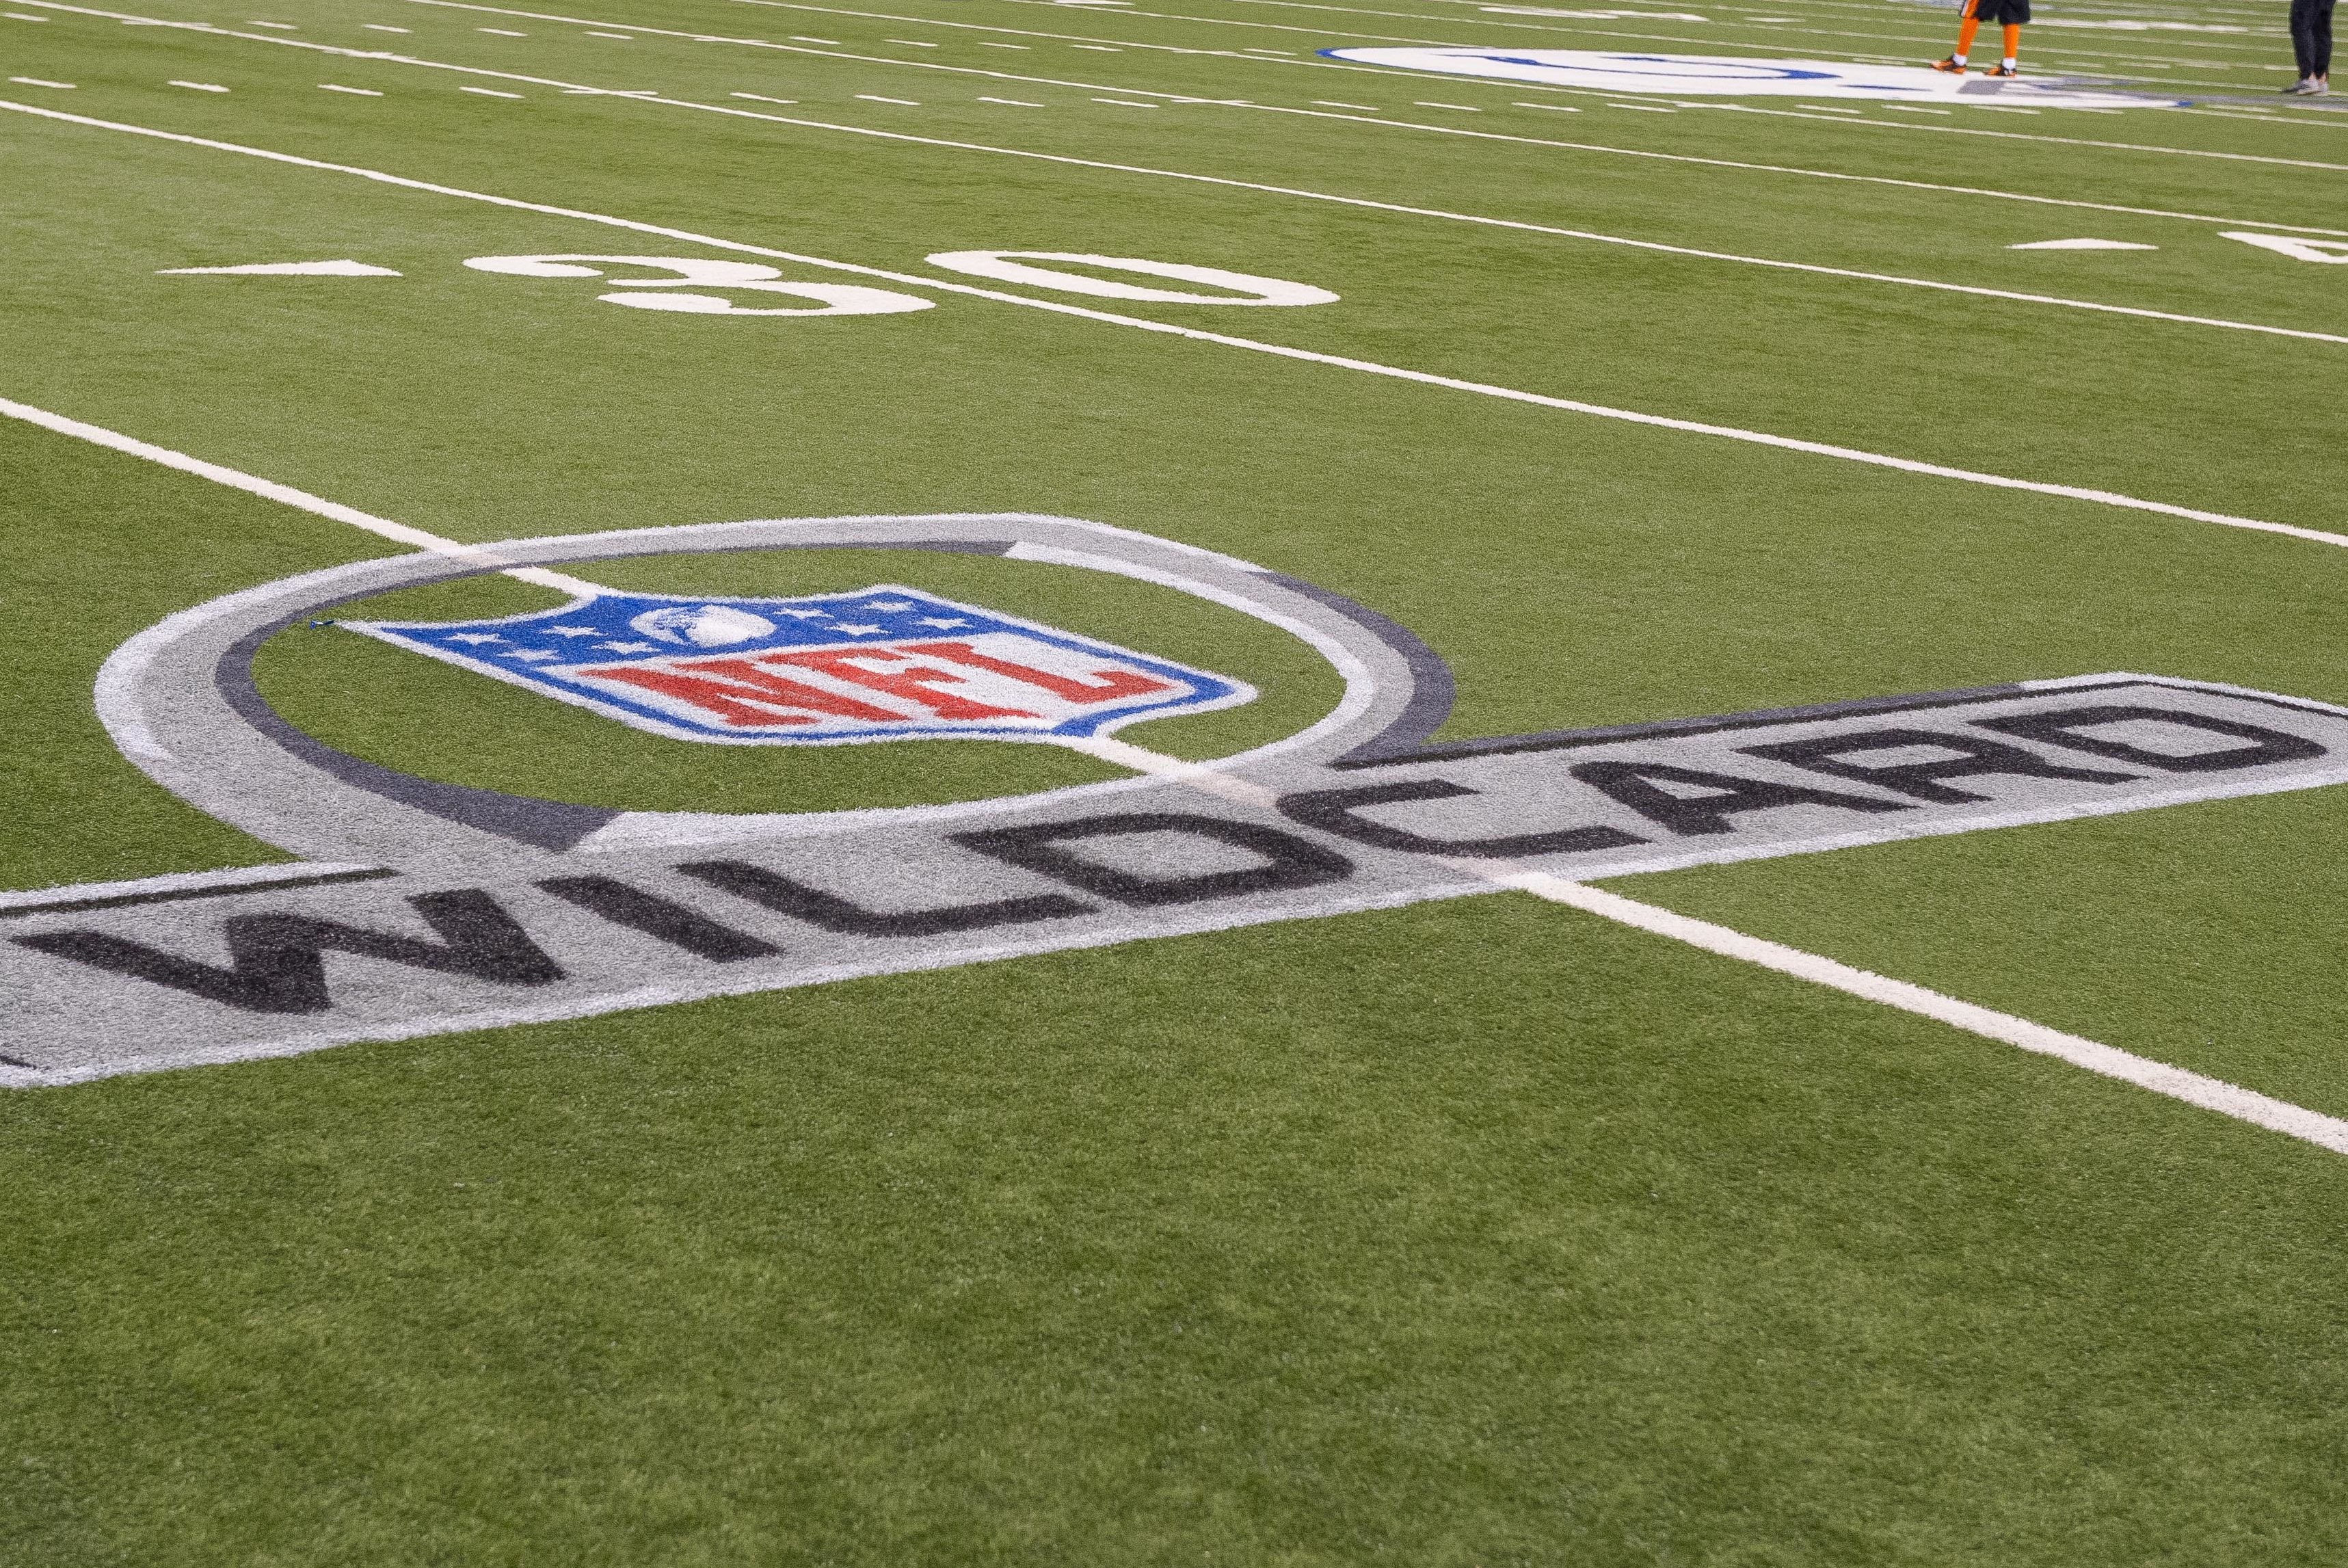 Lucas Oil Stadium with the Wild Card logo painted on the field